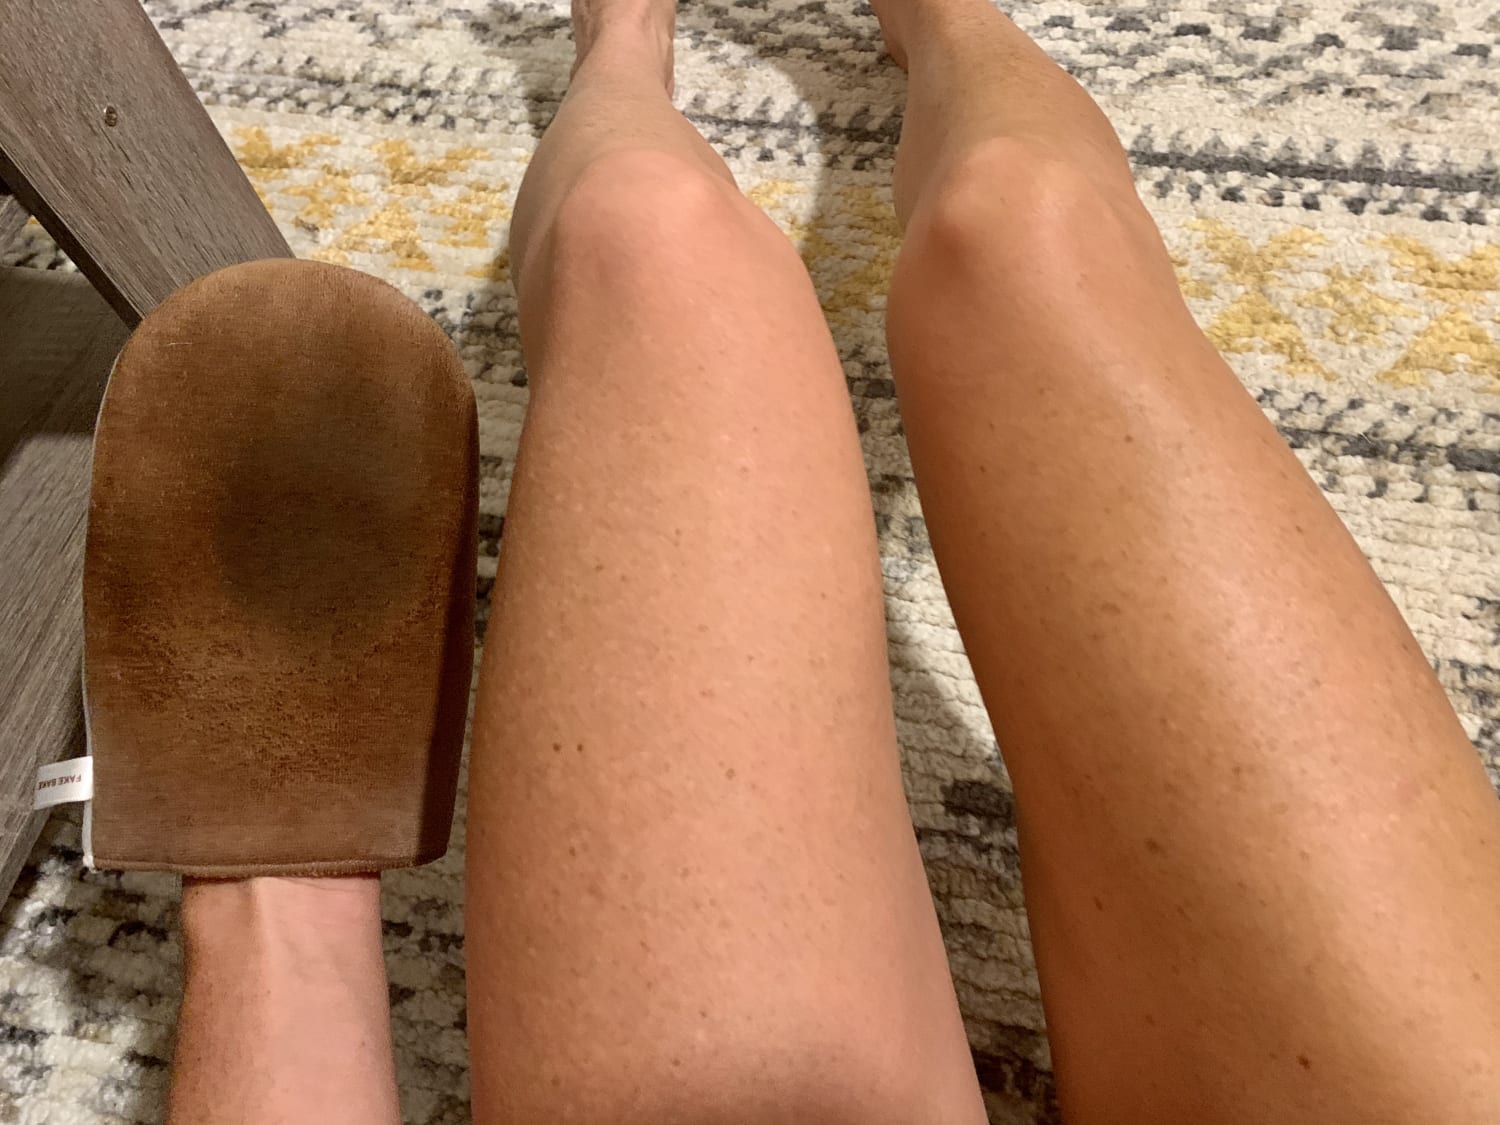 Fake Bake Flawless review: We tried the popular self-tanner